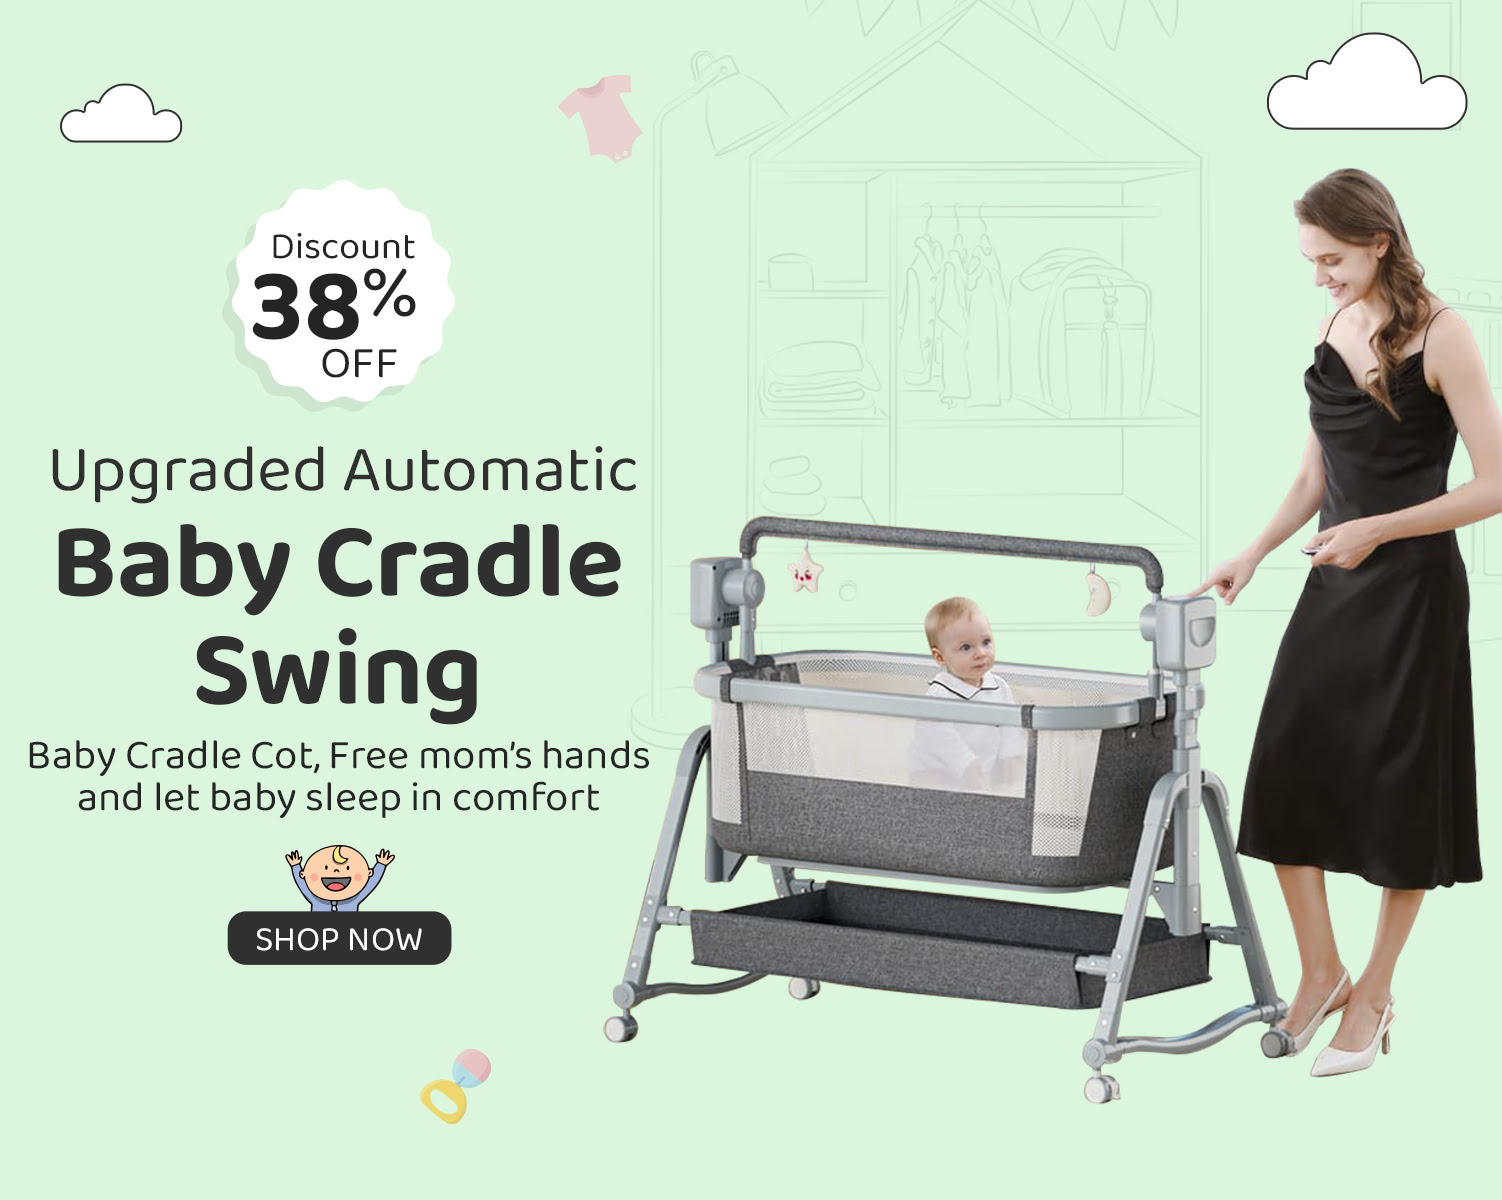 Upgraded Baby Cradle Swing with Mosquito Net, Wooden Legs, and 3 Gear Adjustable Swing with Smart Remote Control